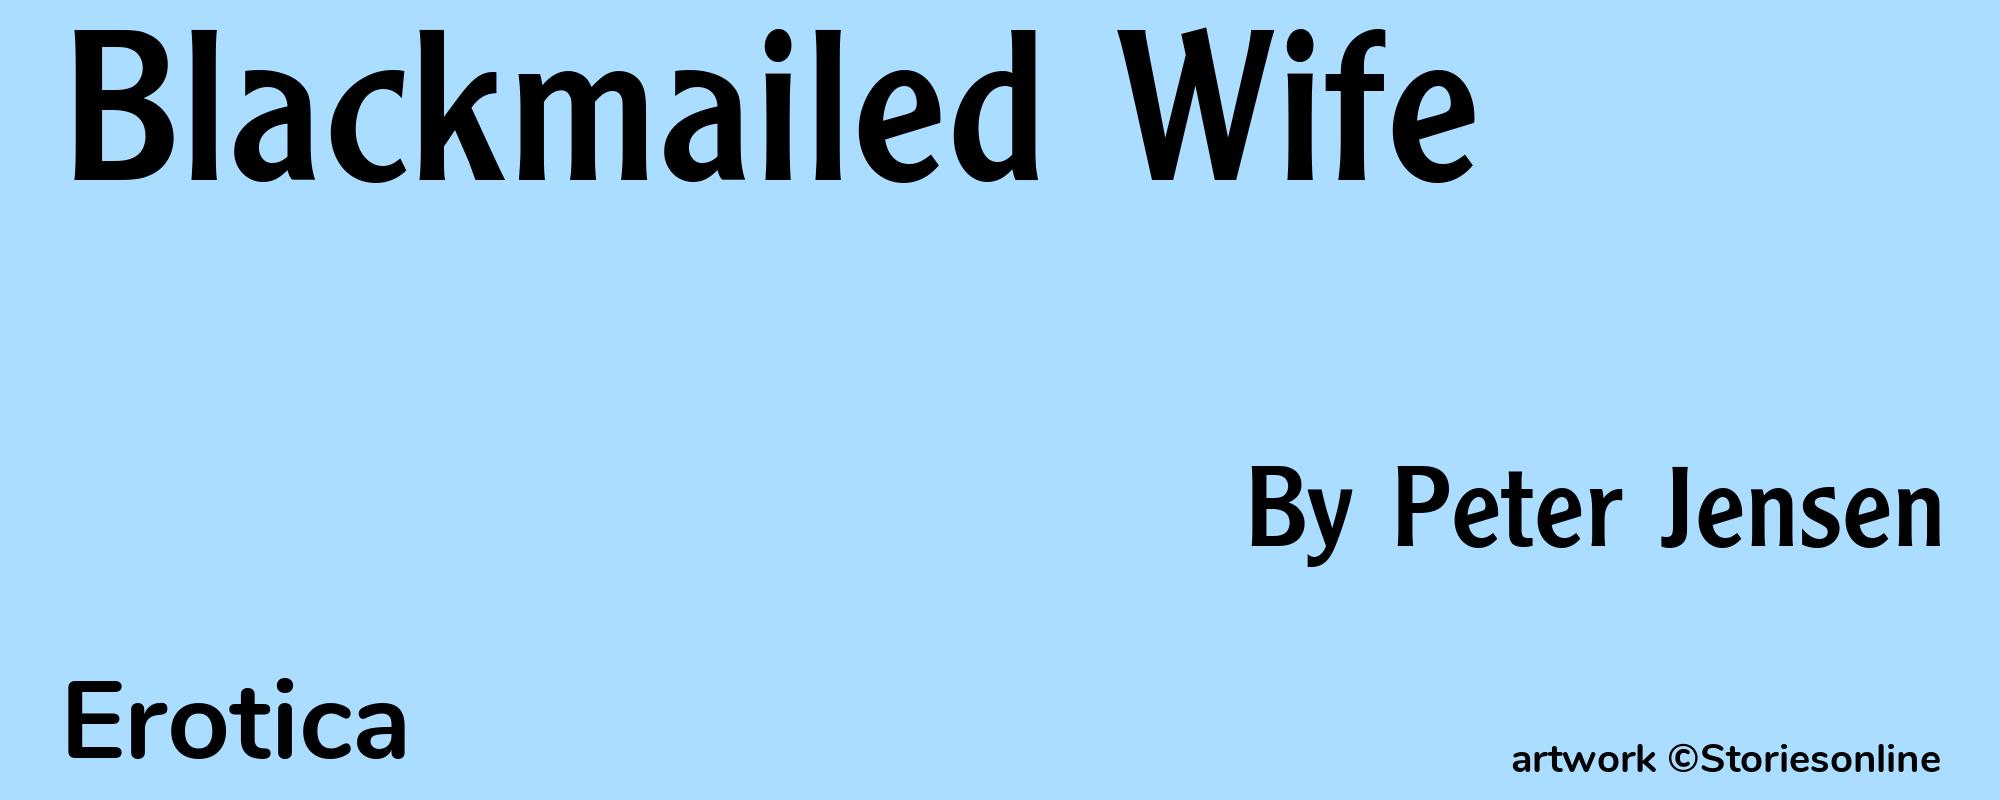 Blackmailed Wife - Cover